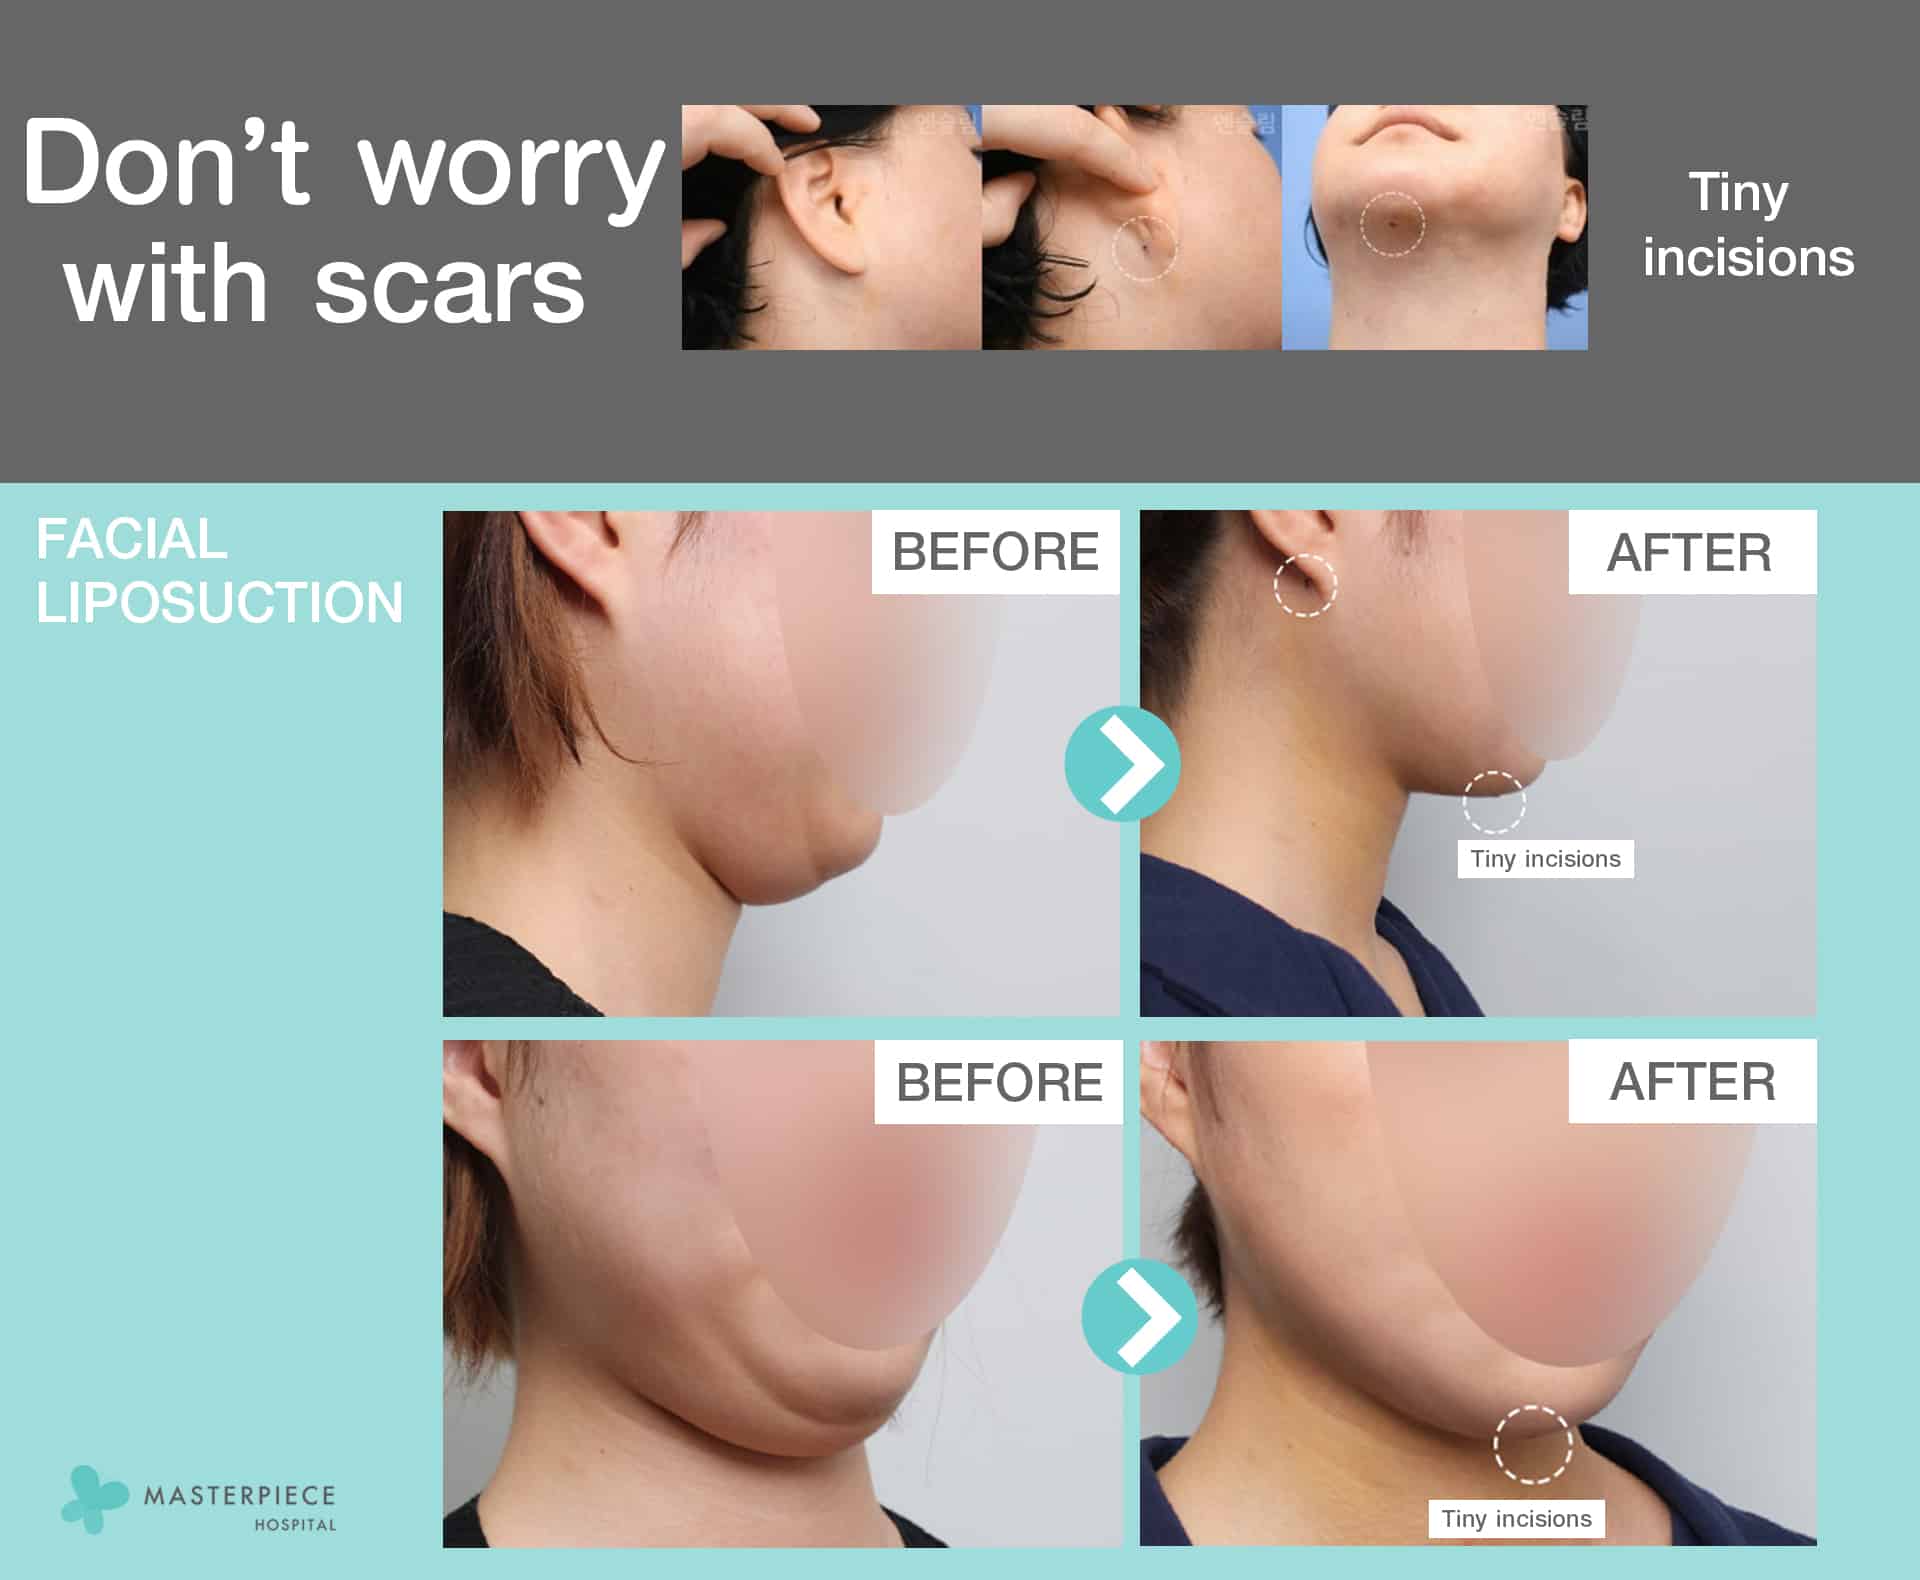 Facial Liposuction by Masterpiece Don’t worry with scars